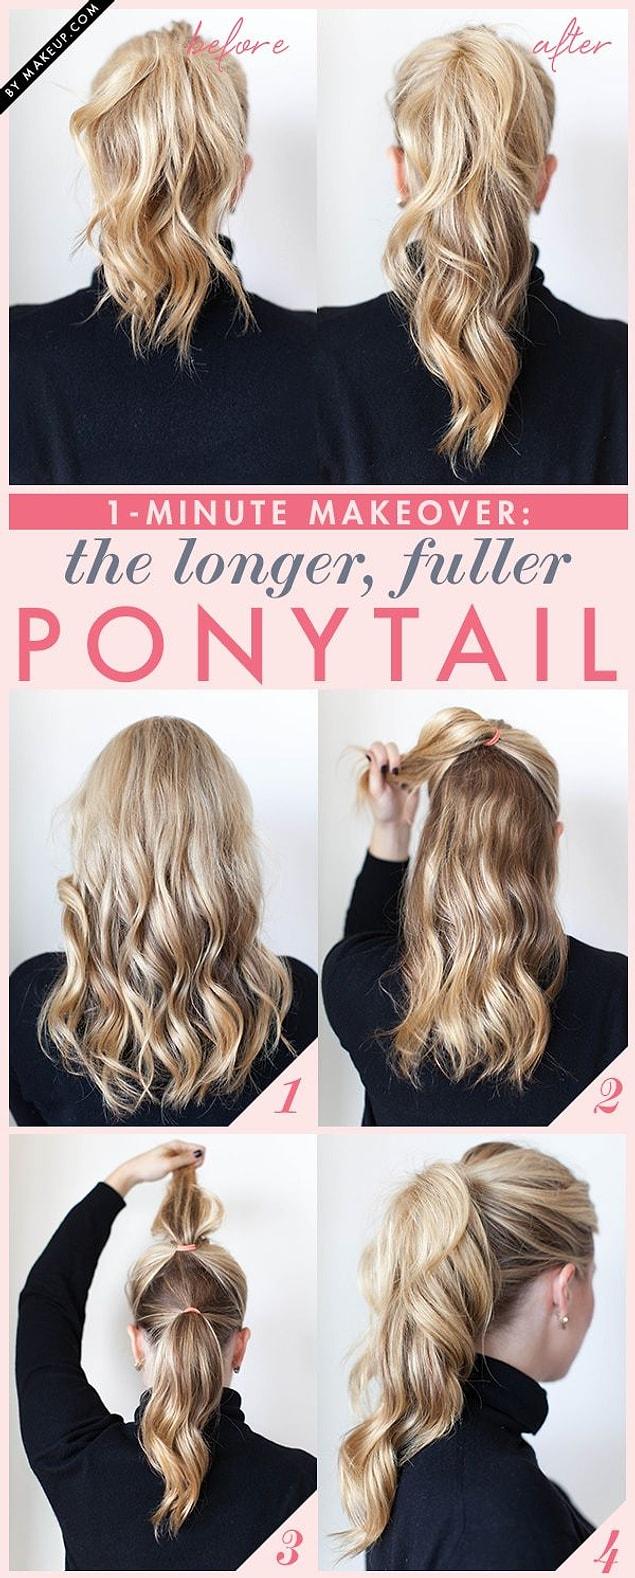 15. You can use your pony tail to make your hair look longer if you want!